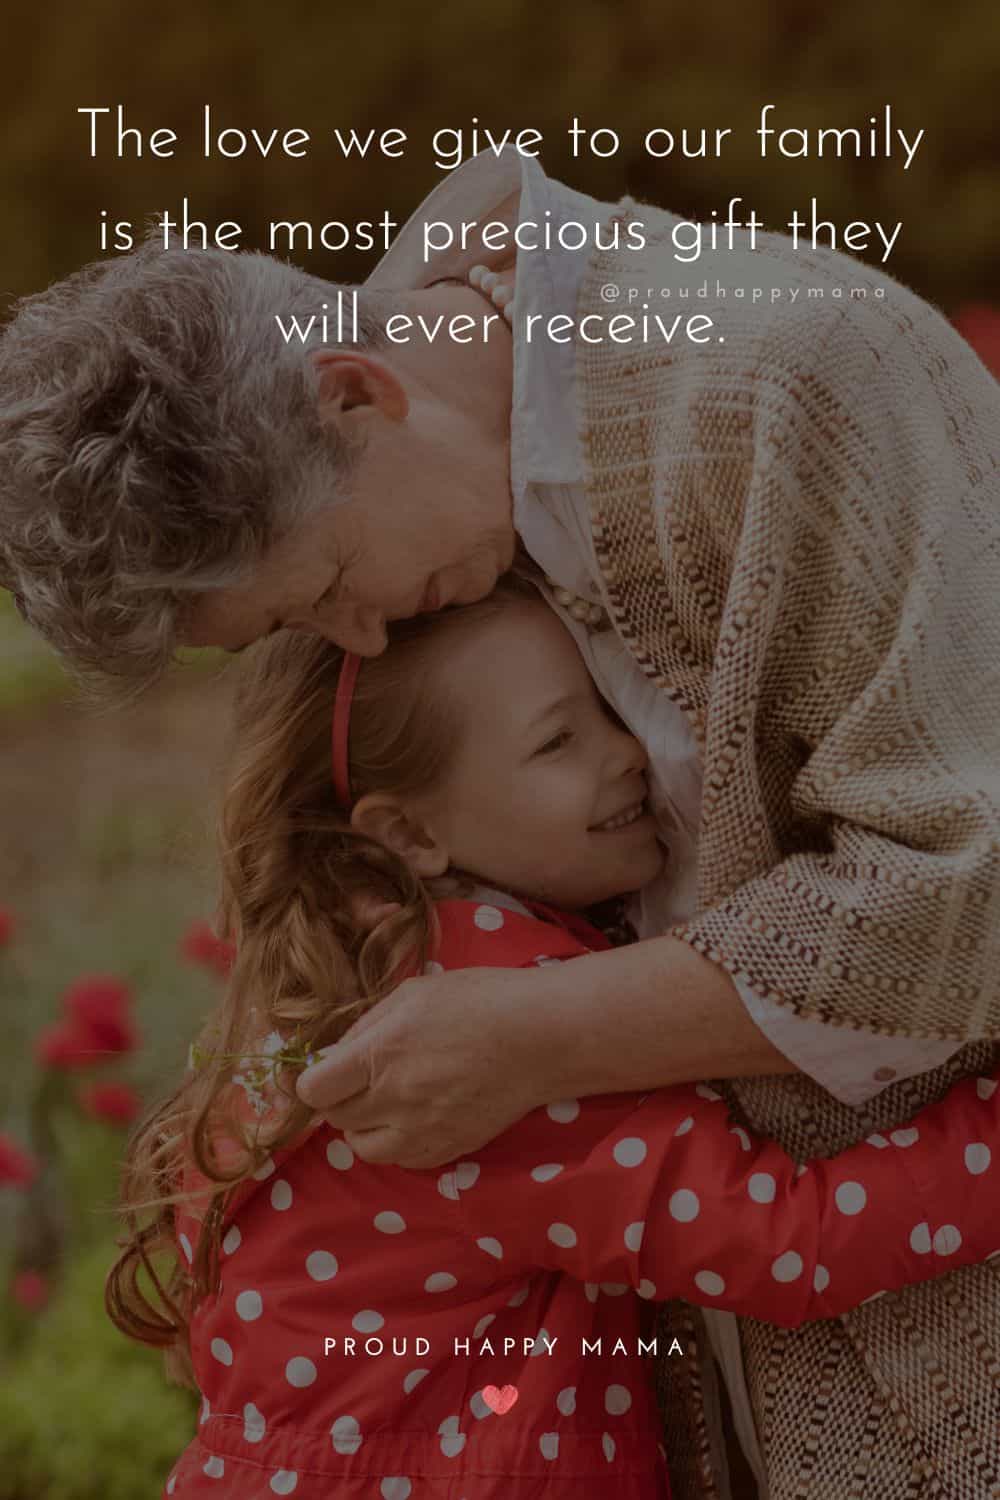 time with family quotes - The love we give to our family is the most precious gift they will ever receive.